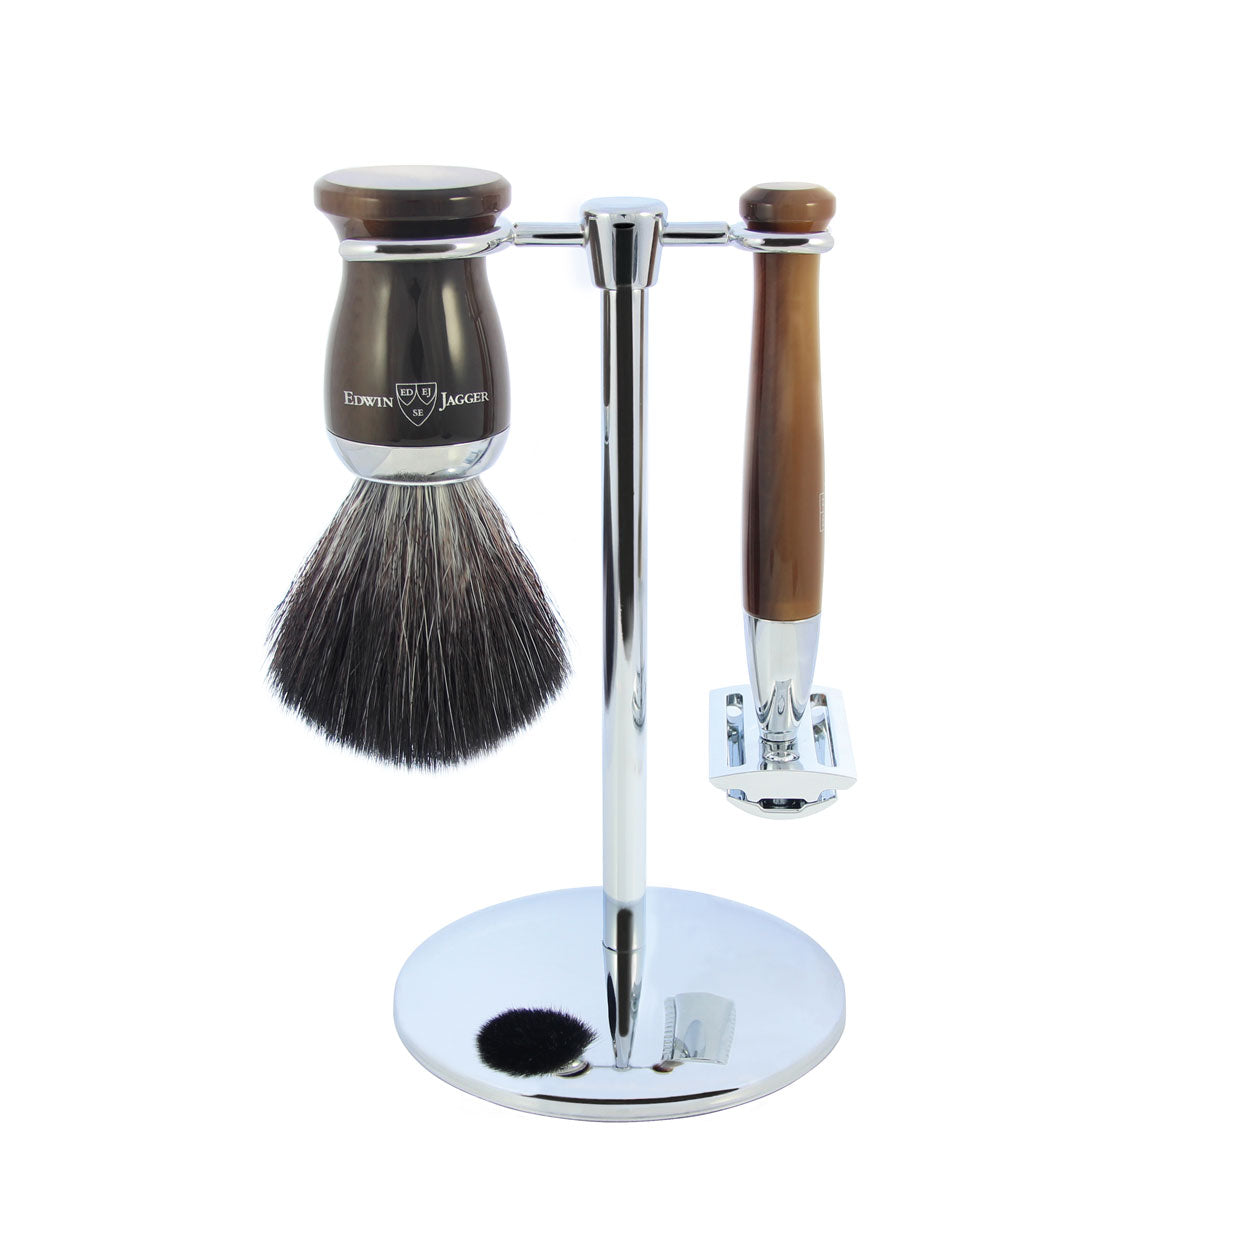 Load image into Gallery viewer, Edwin Jagger Imitation Light Horn Double Edge Safety Razor 3 Piece Set
